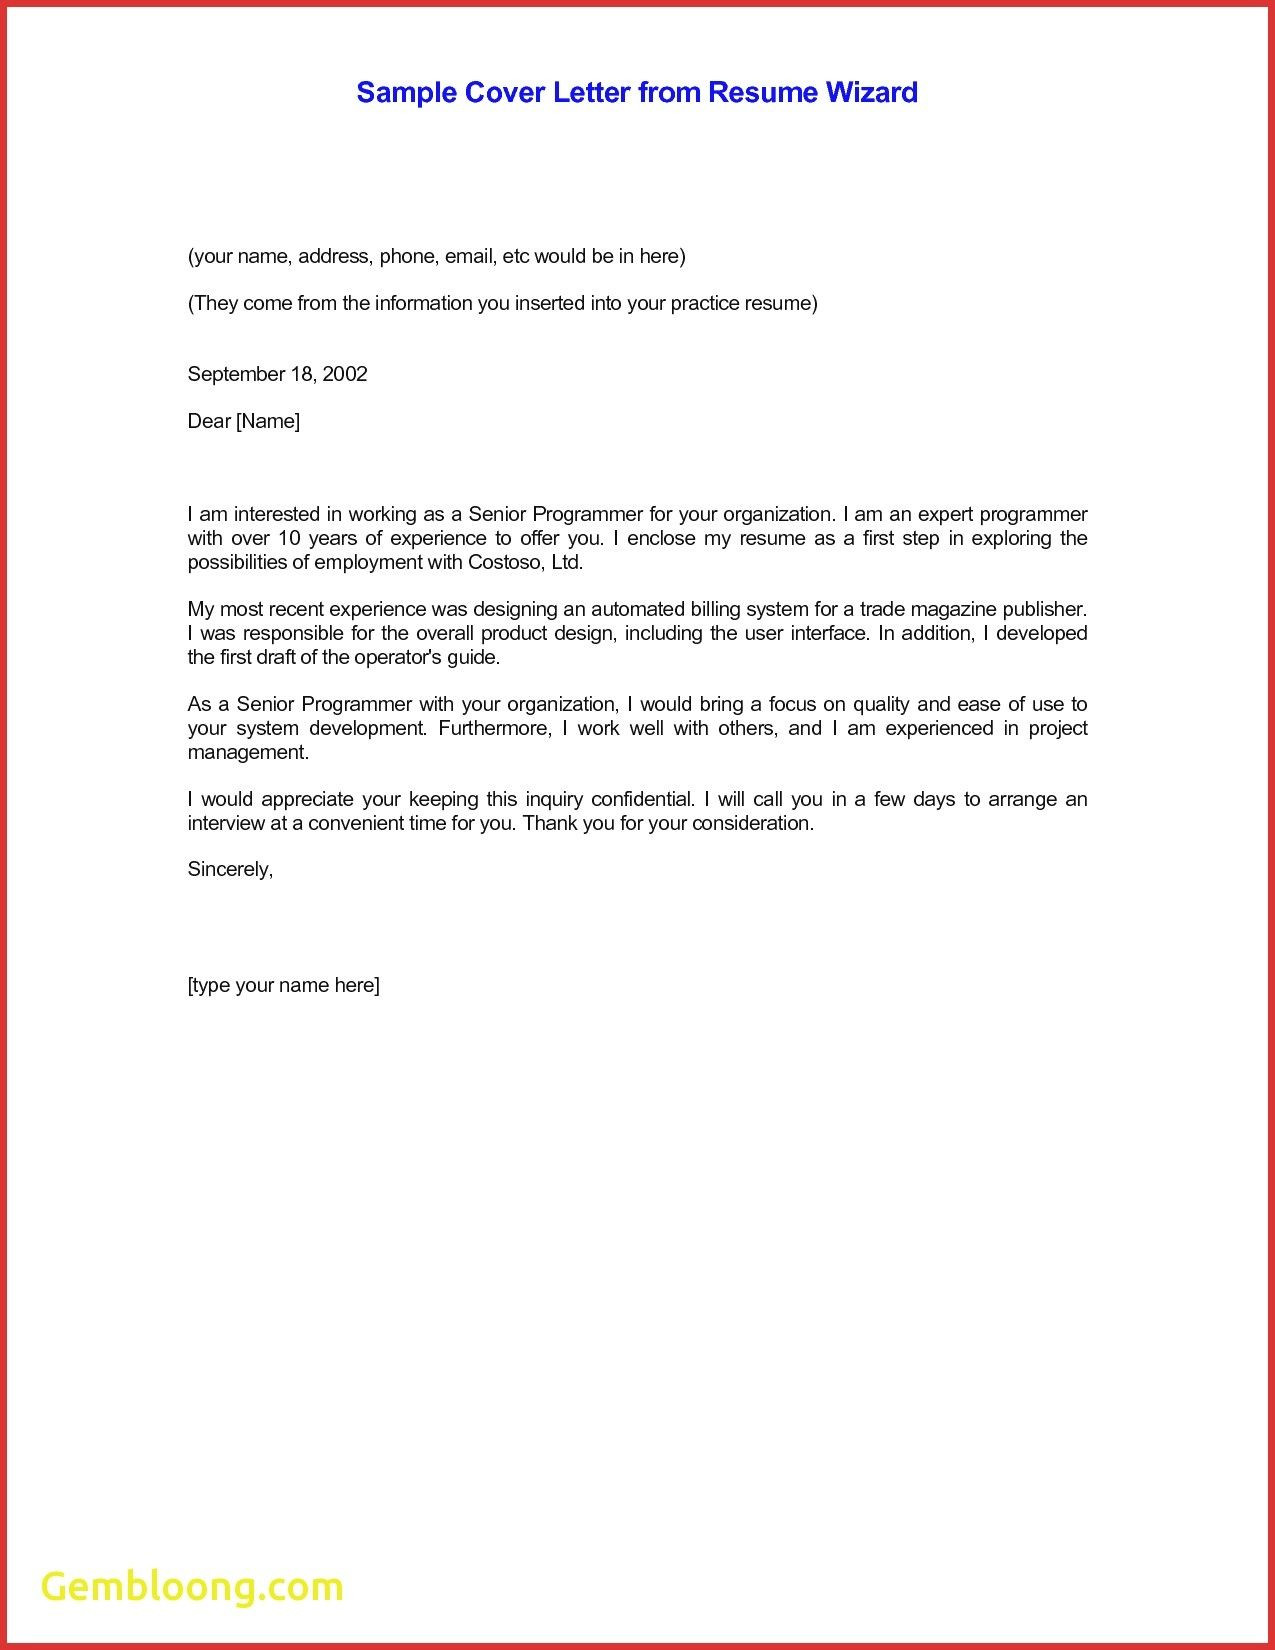 Email Cover Letter and Resume Sample Email Cv Cover Letter Template – Resume format Cover Letter for …